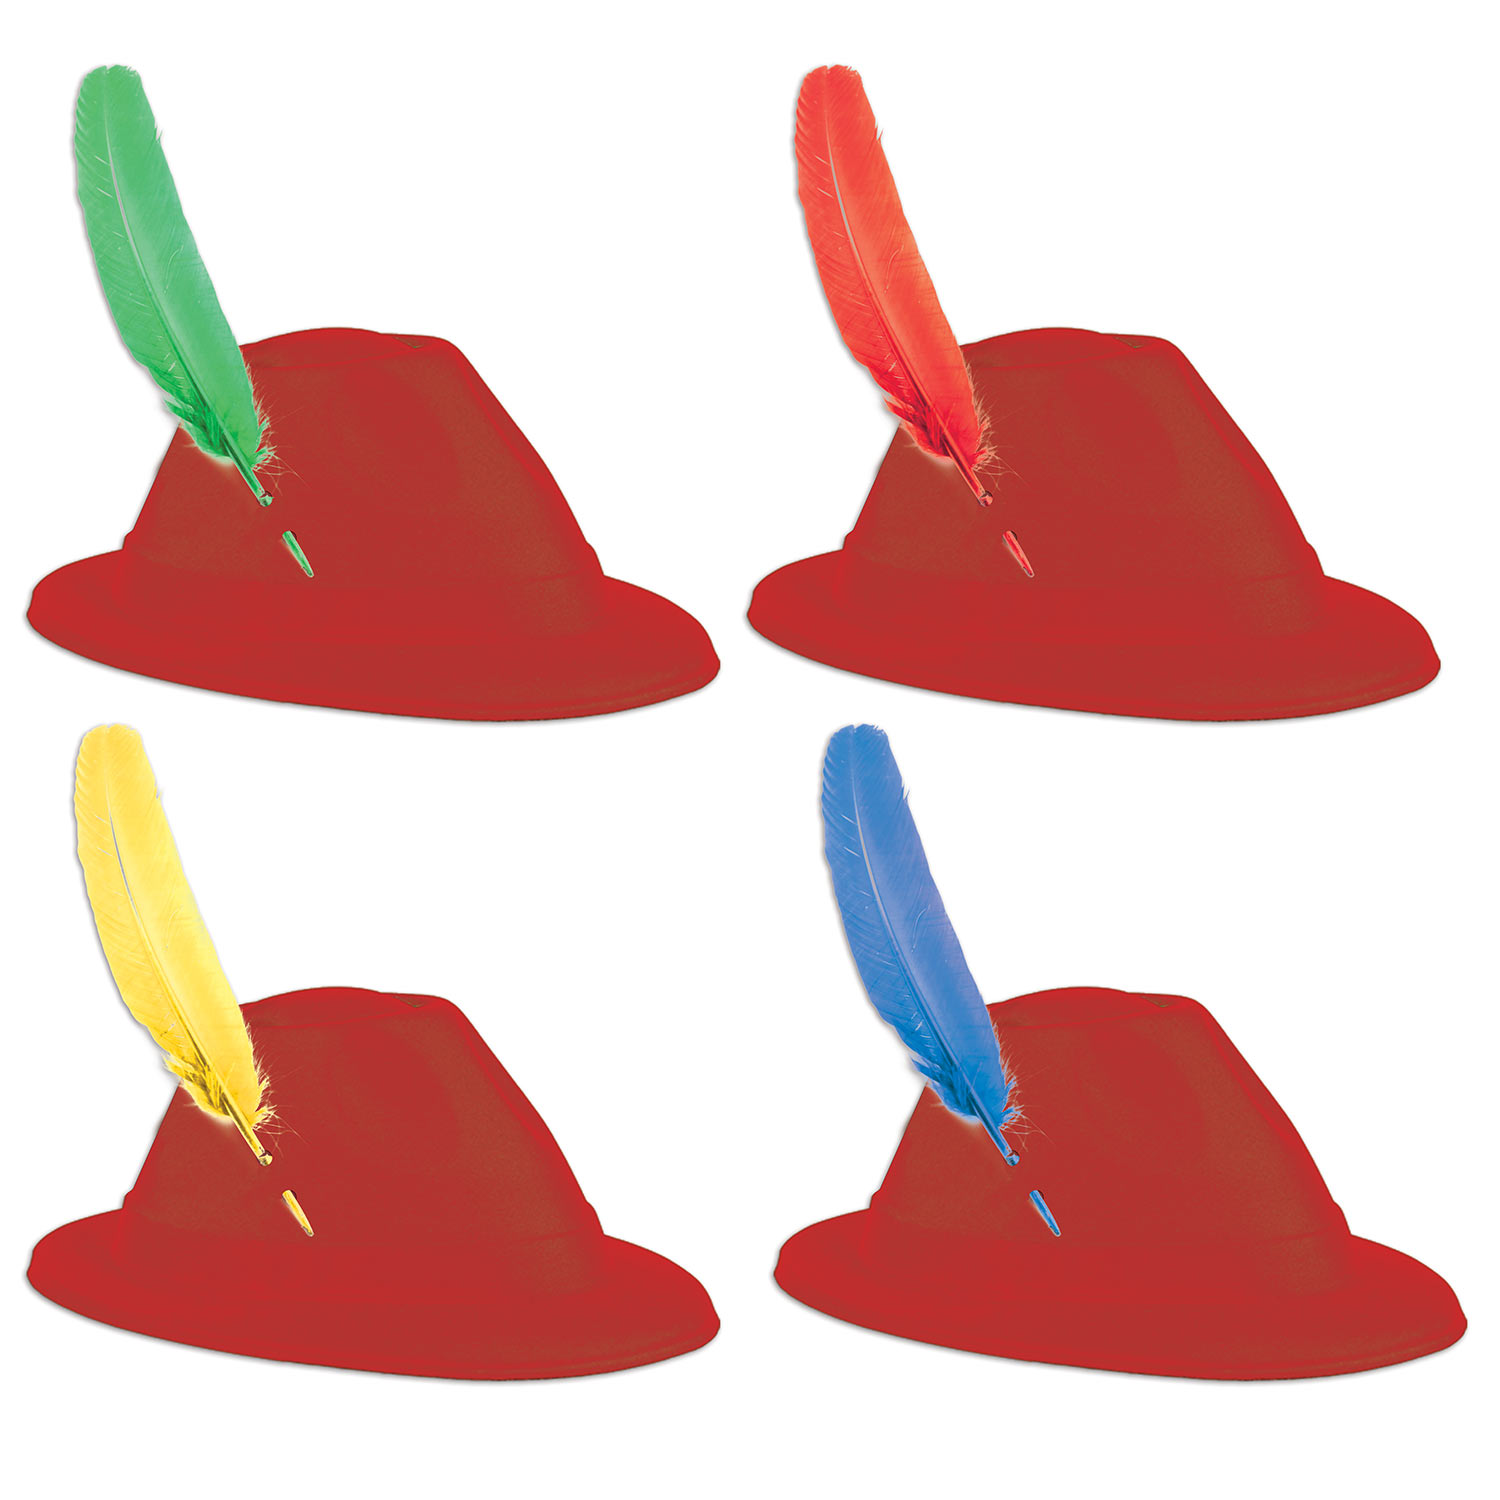 Red velour alpine hats with assorted colored feathers.